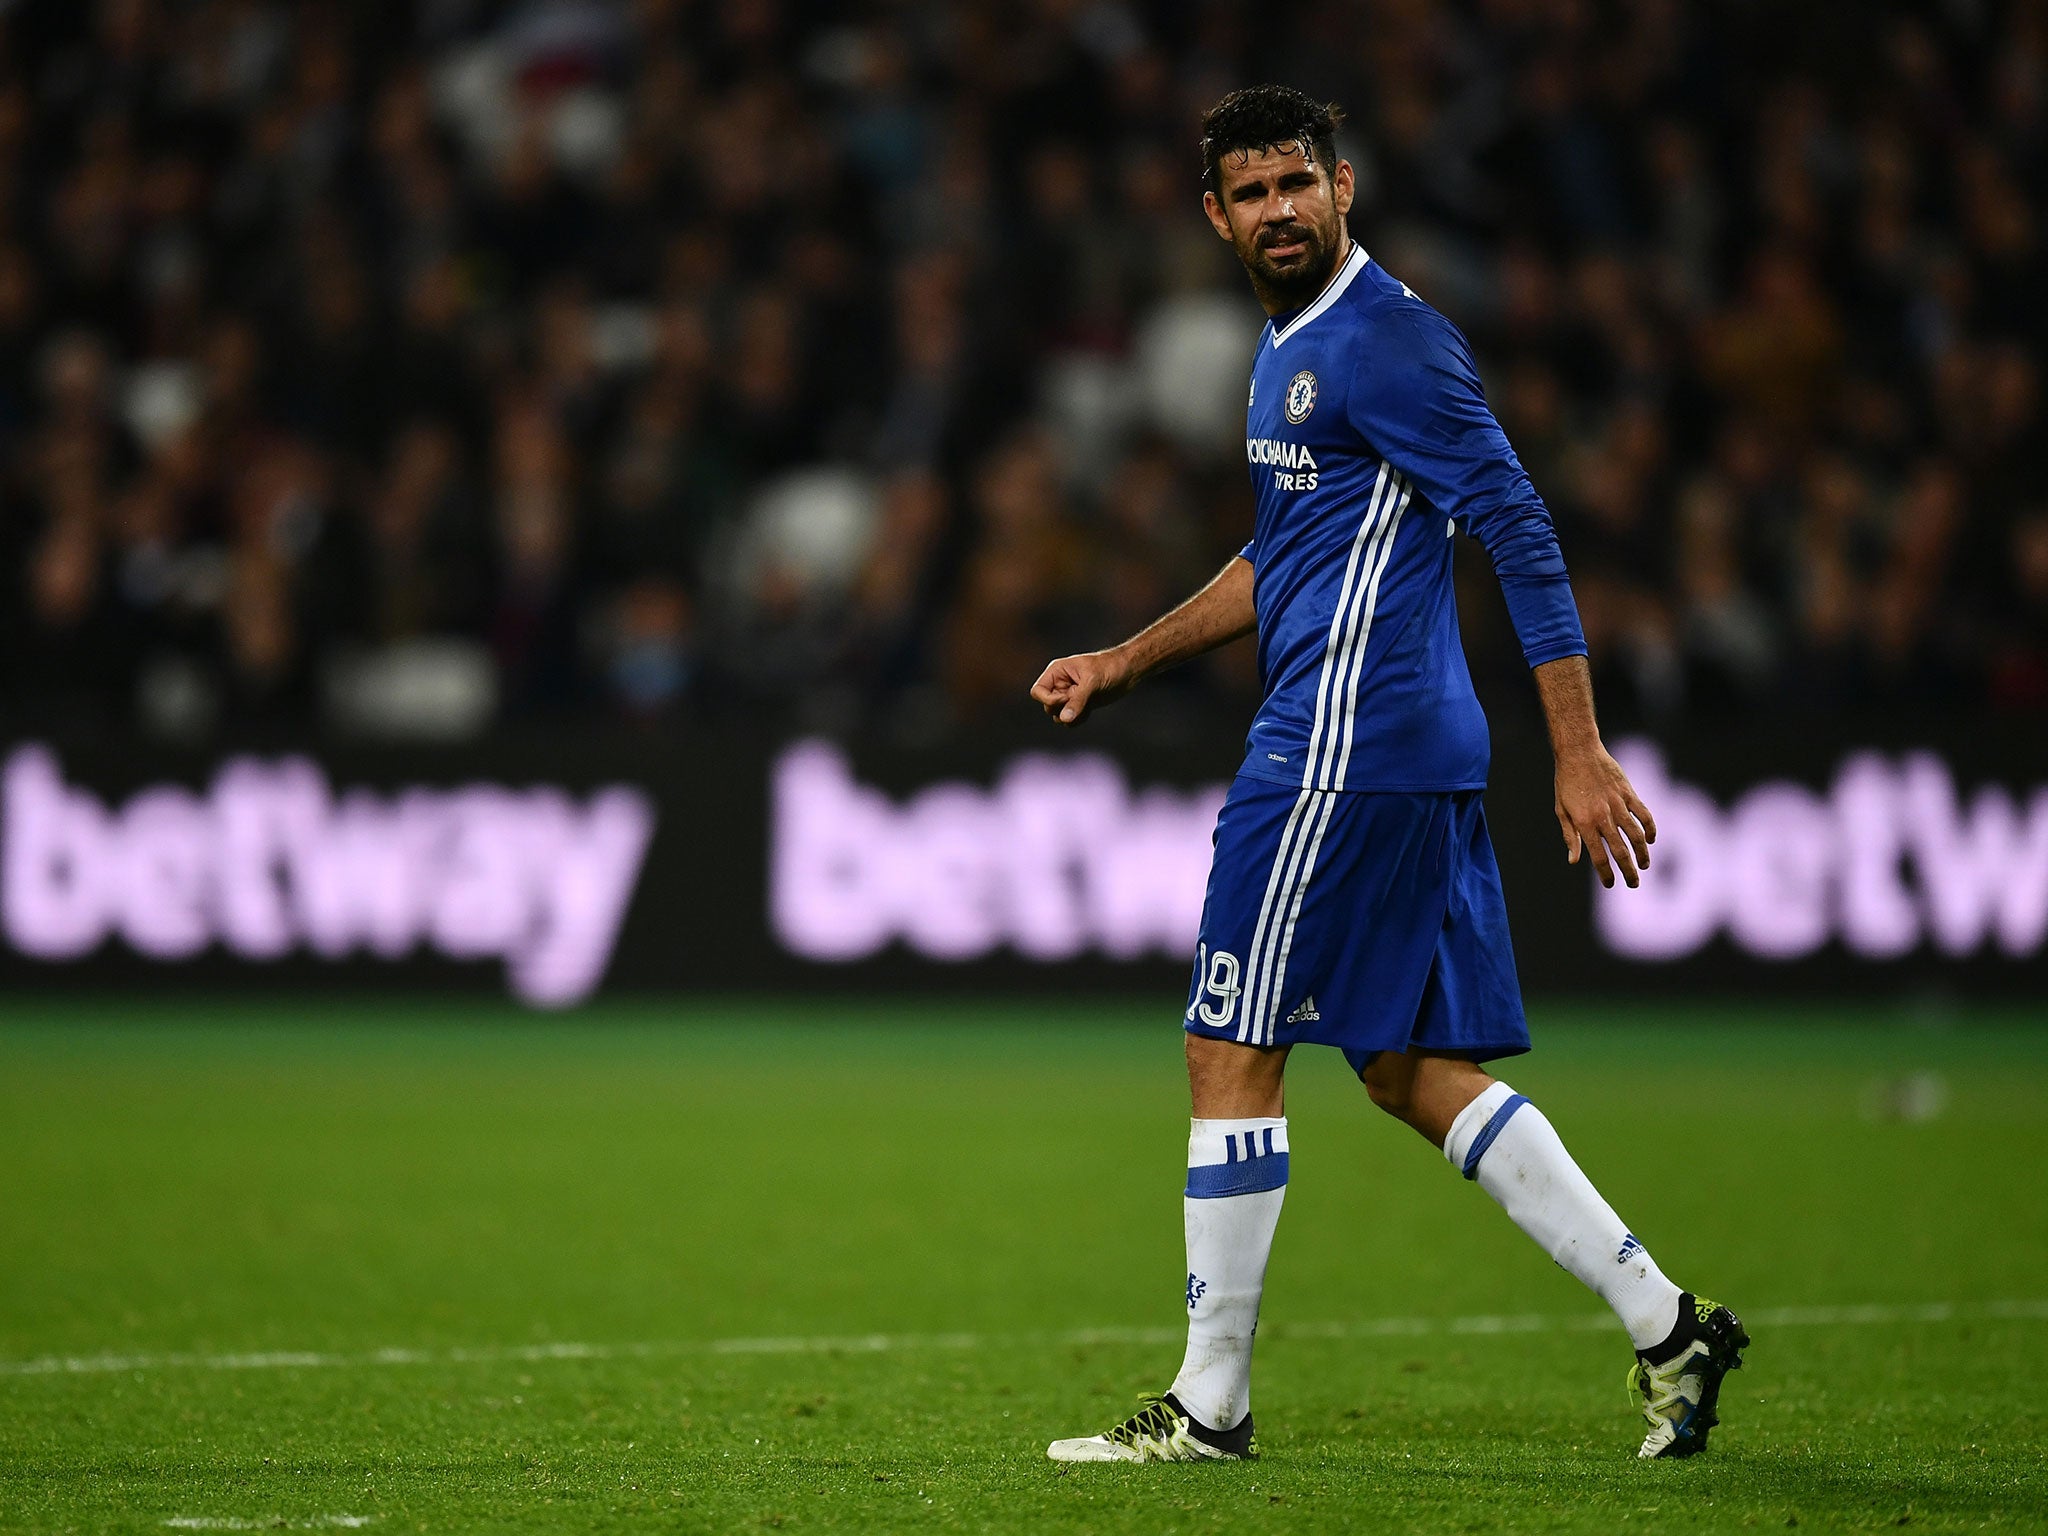 Diego Costa has more support